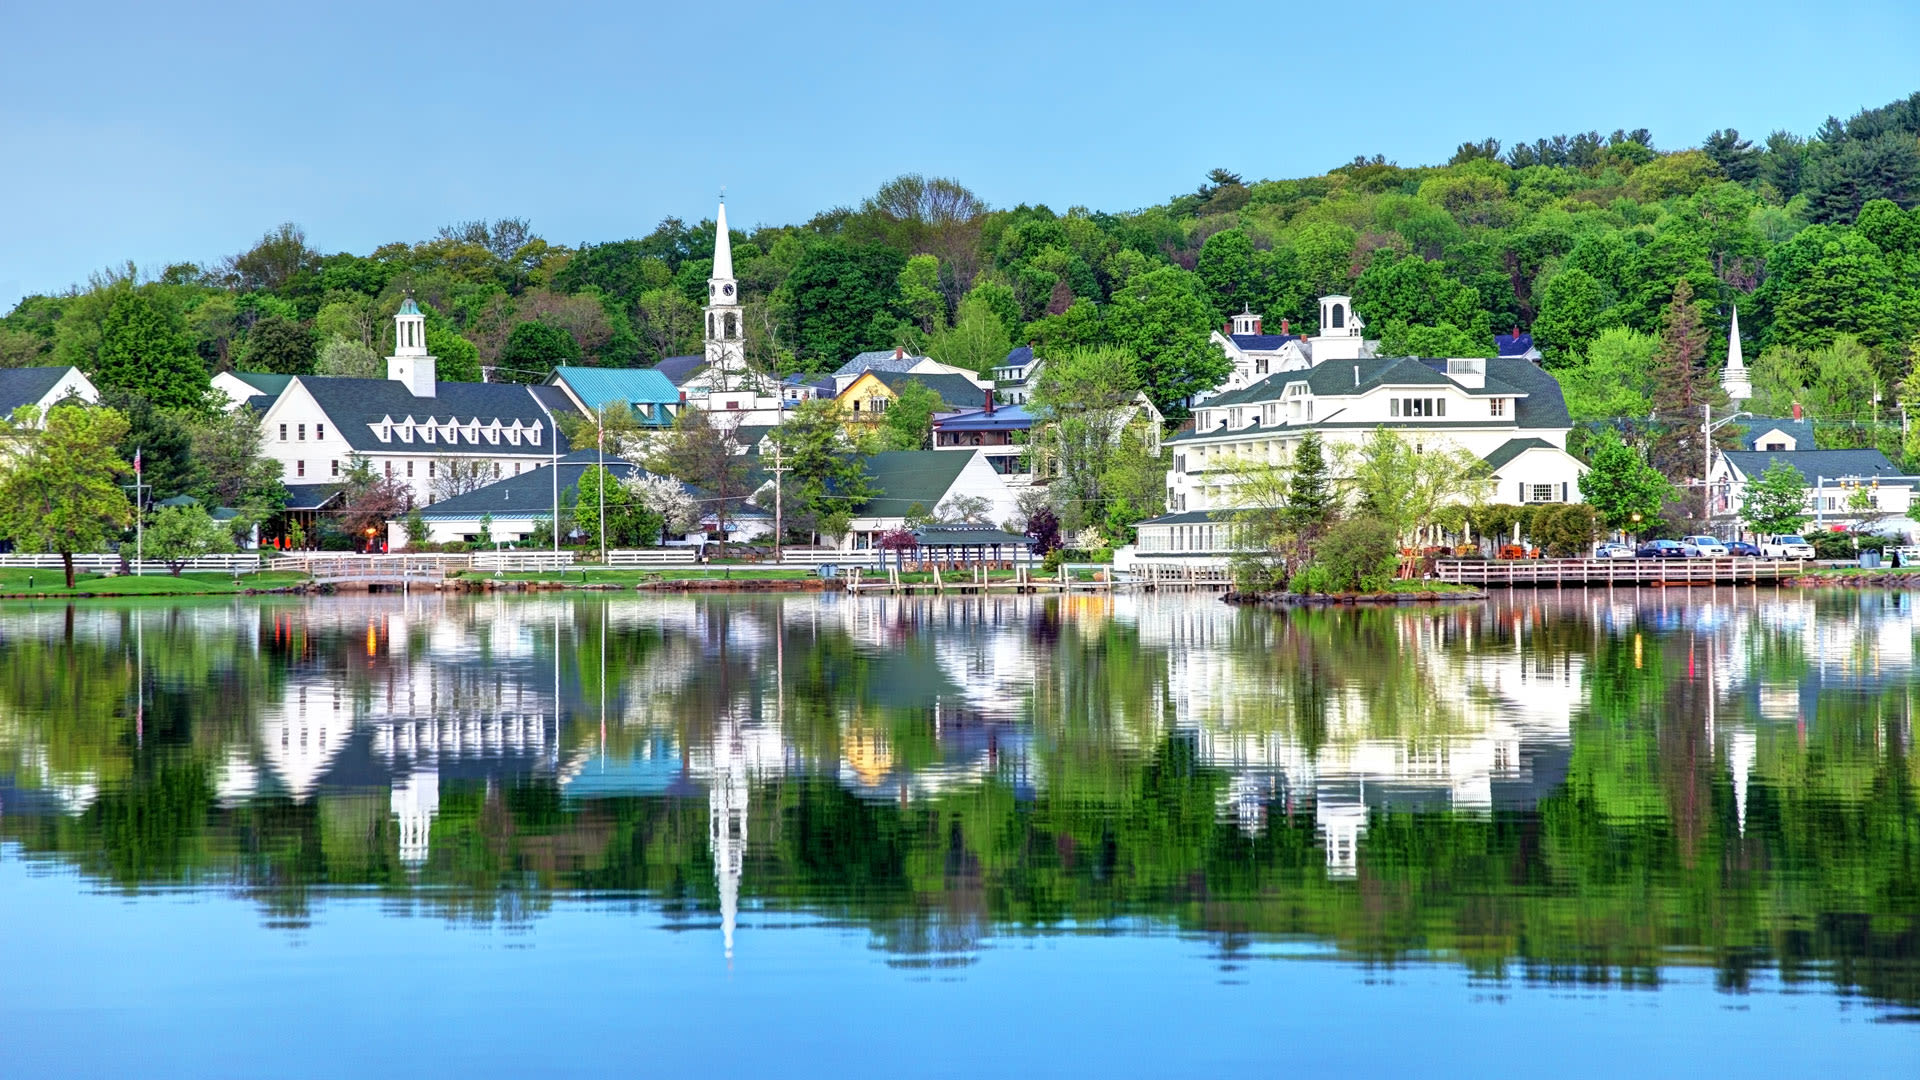 Watch 11 of the Best Lake Towns in America | Architectural Digest